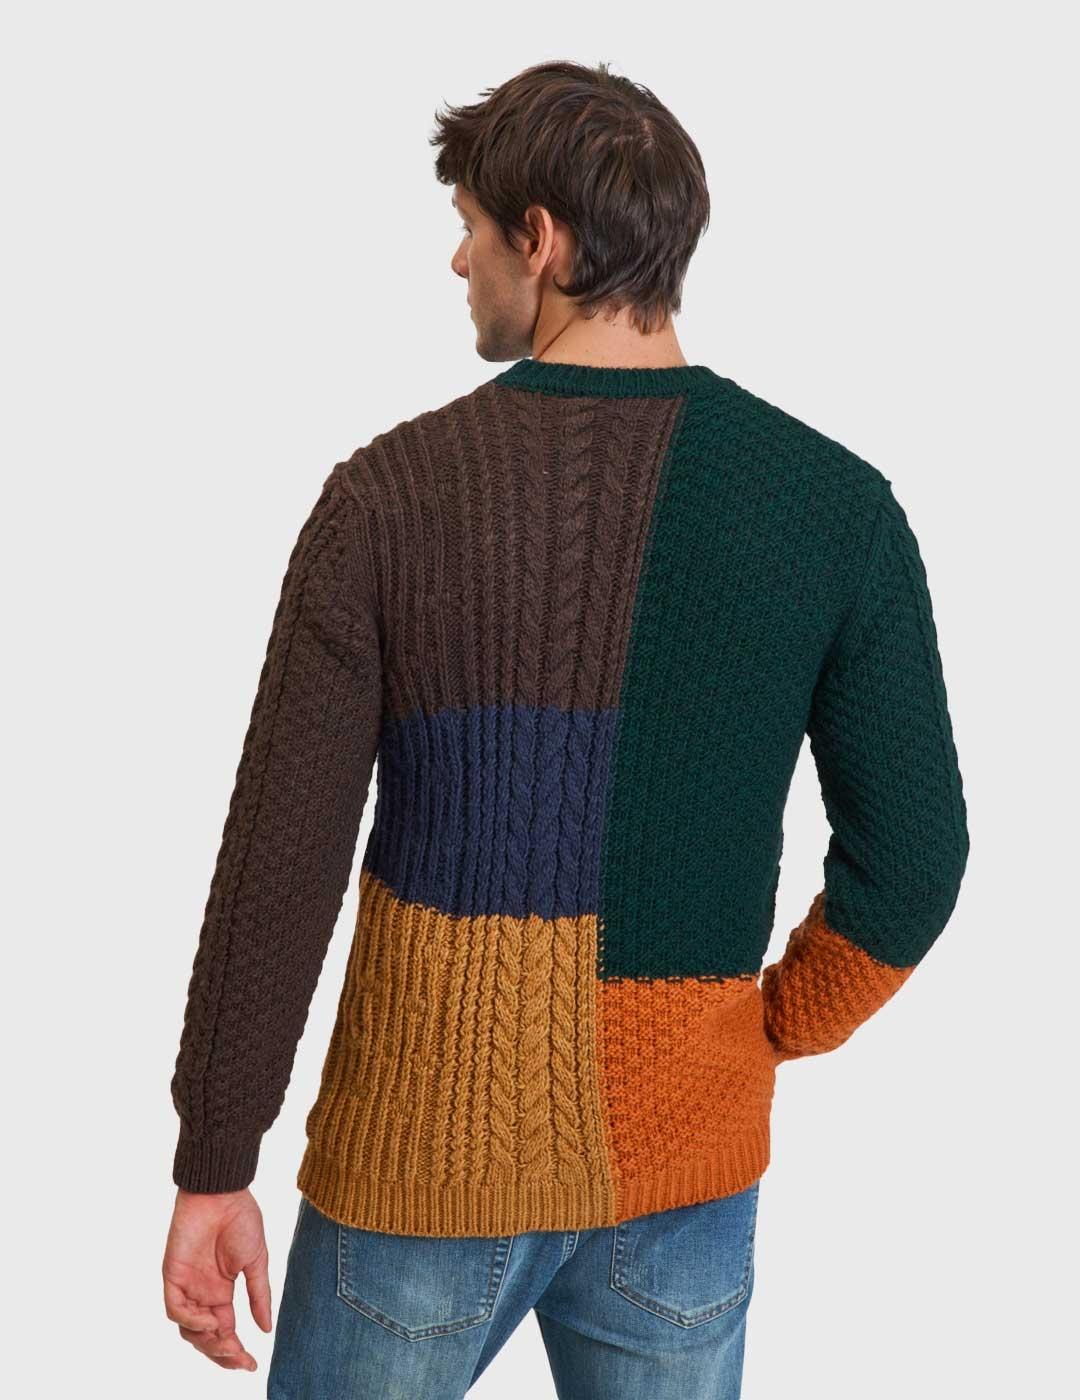 Jersey Gianni Lupo Colour Block Cable Knit multicolor